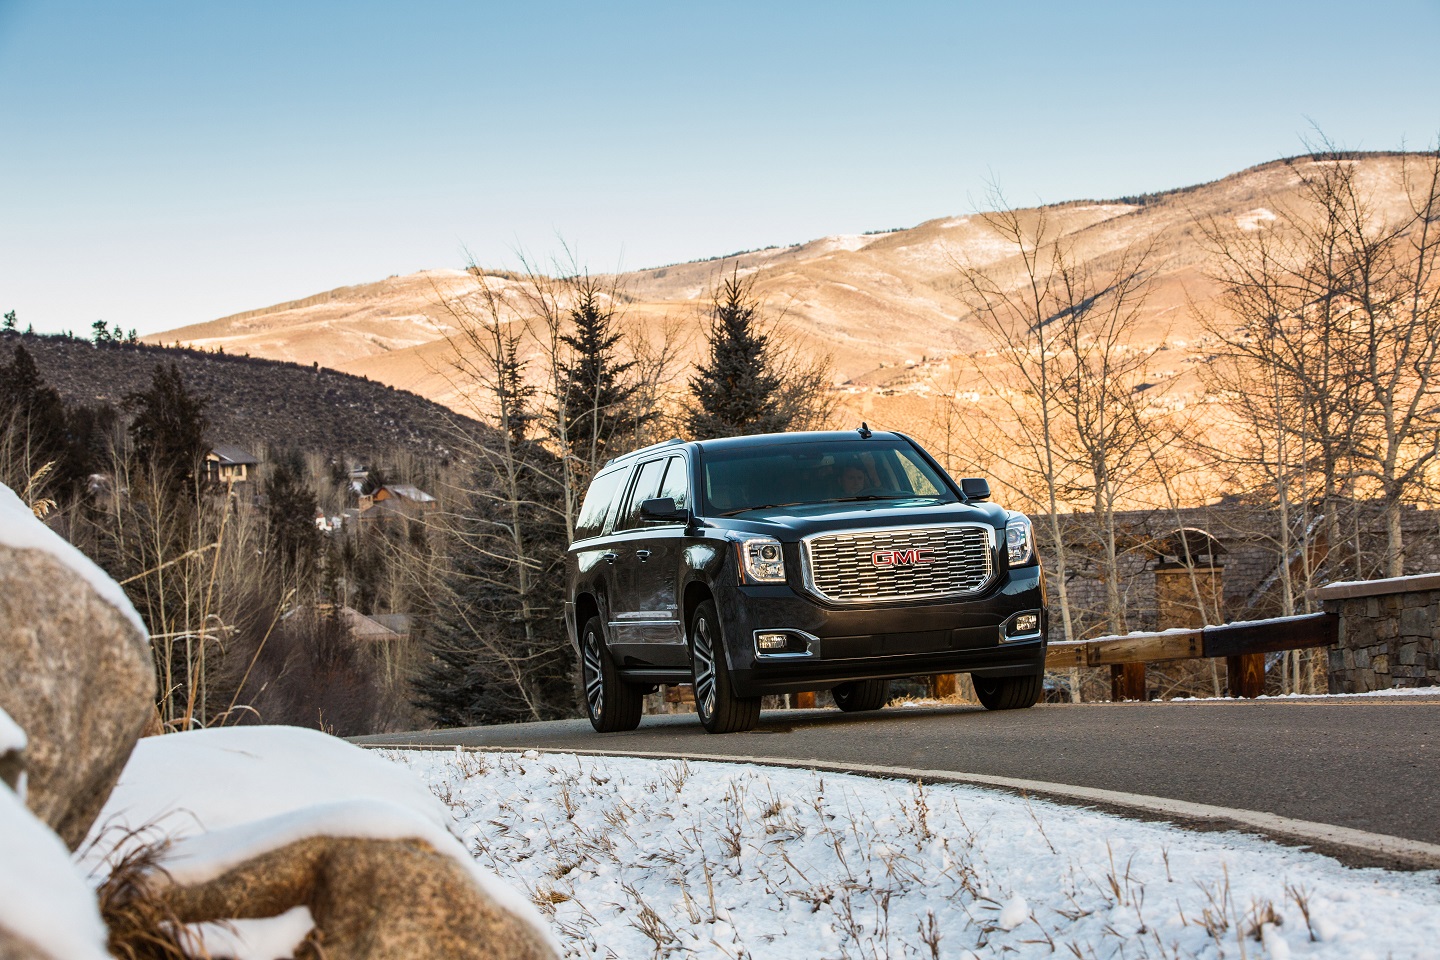 GMC Yukon Then and Now: Comparing the Big SUV's 2021 and Old Models